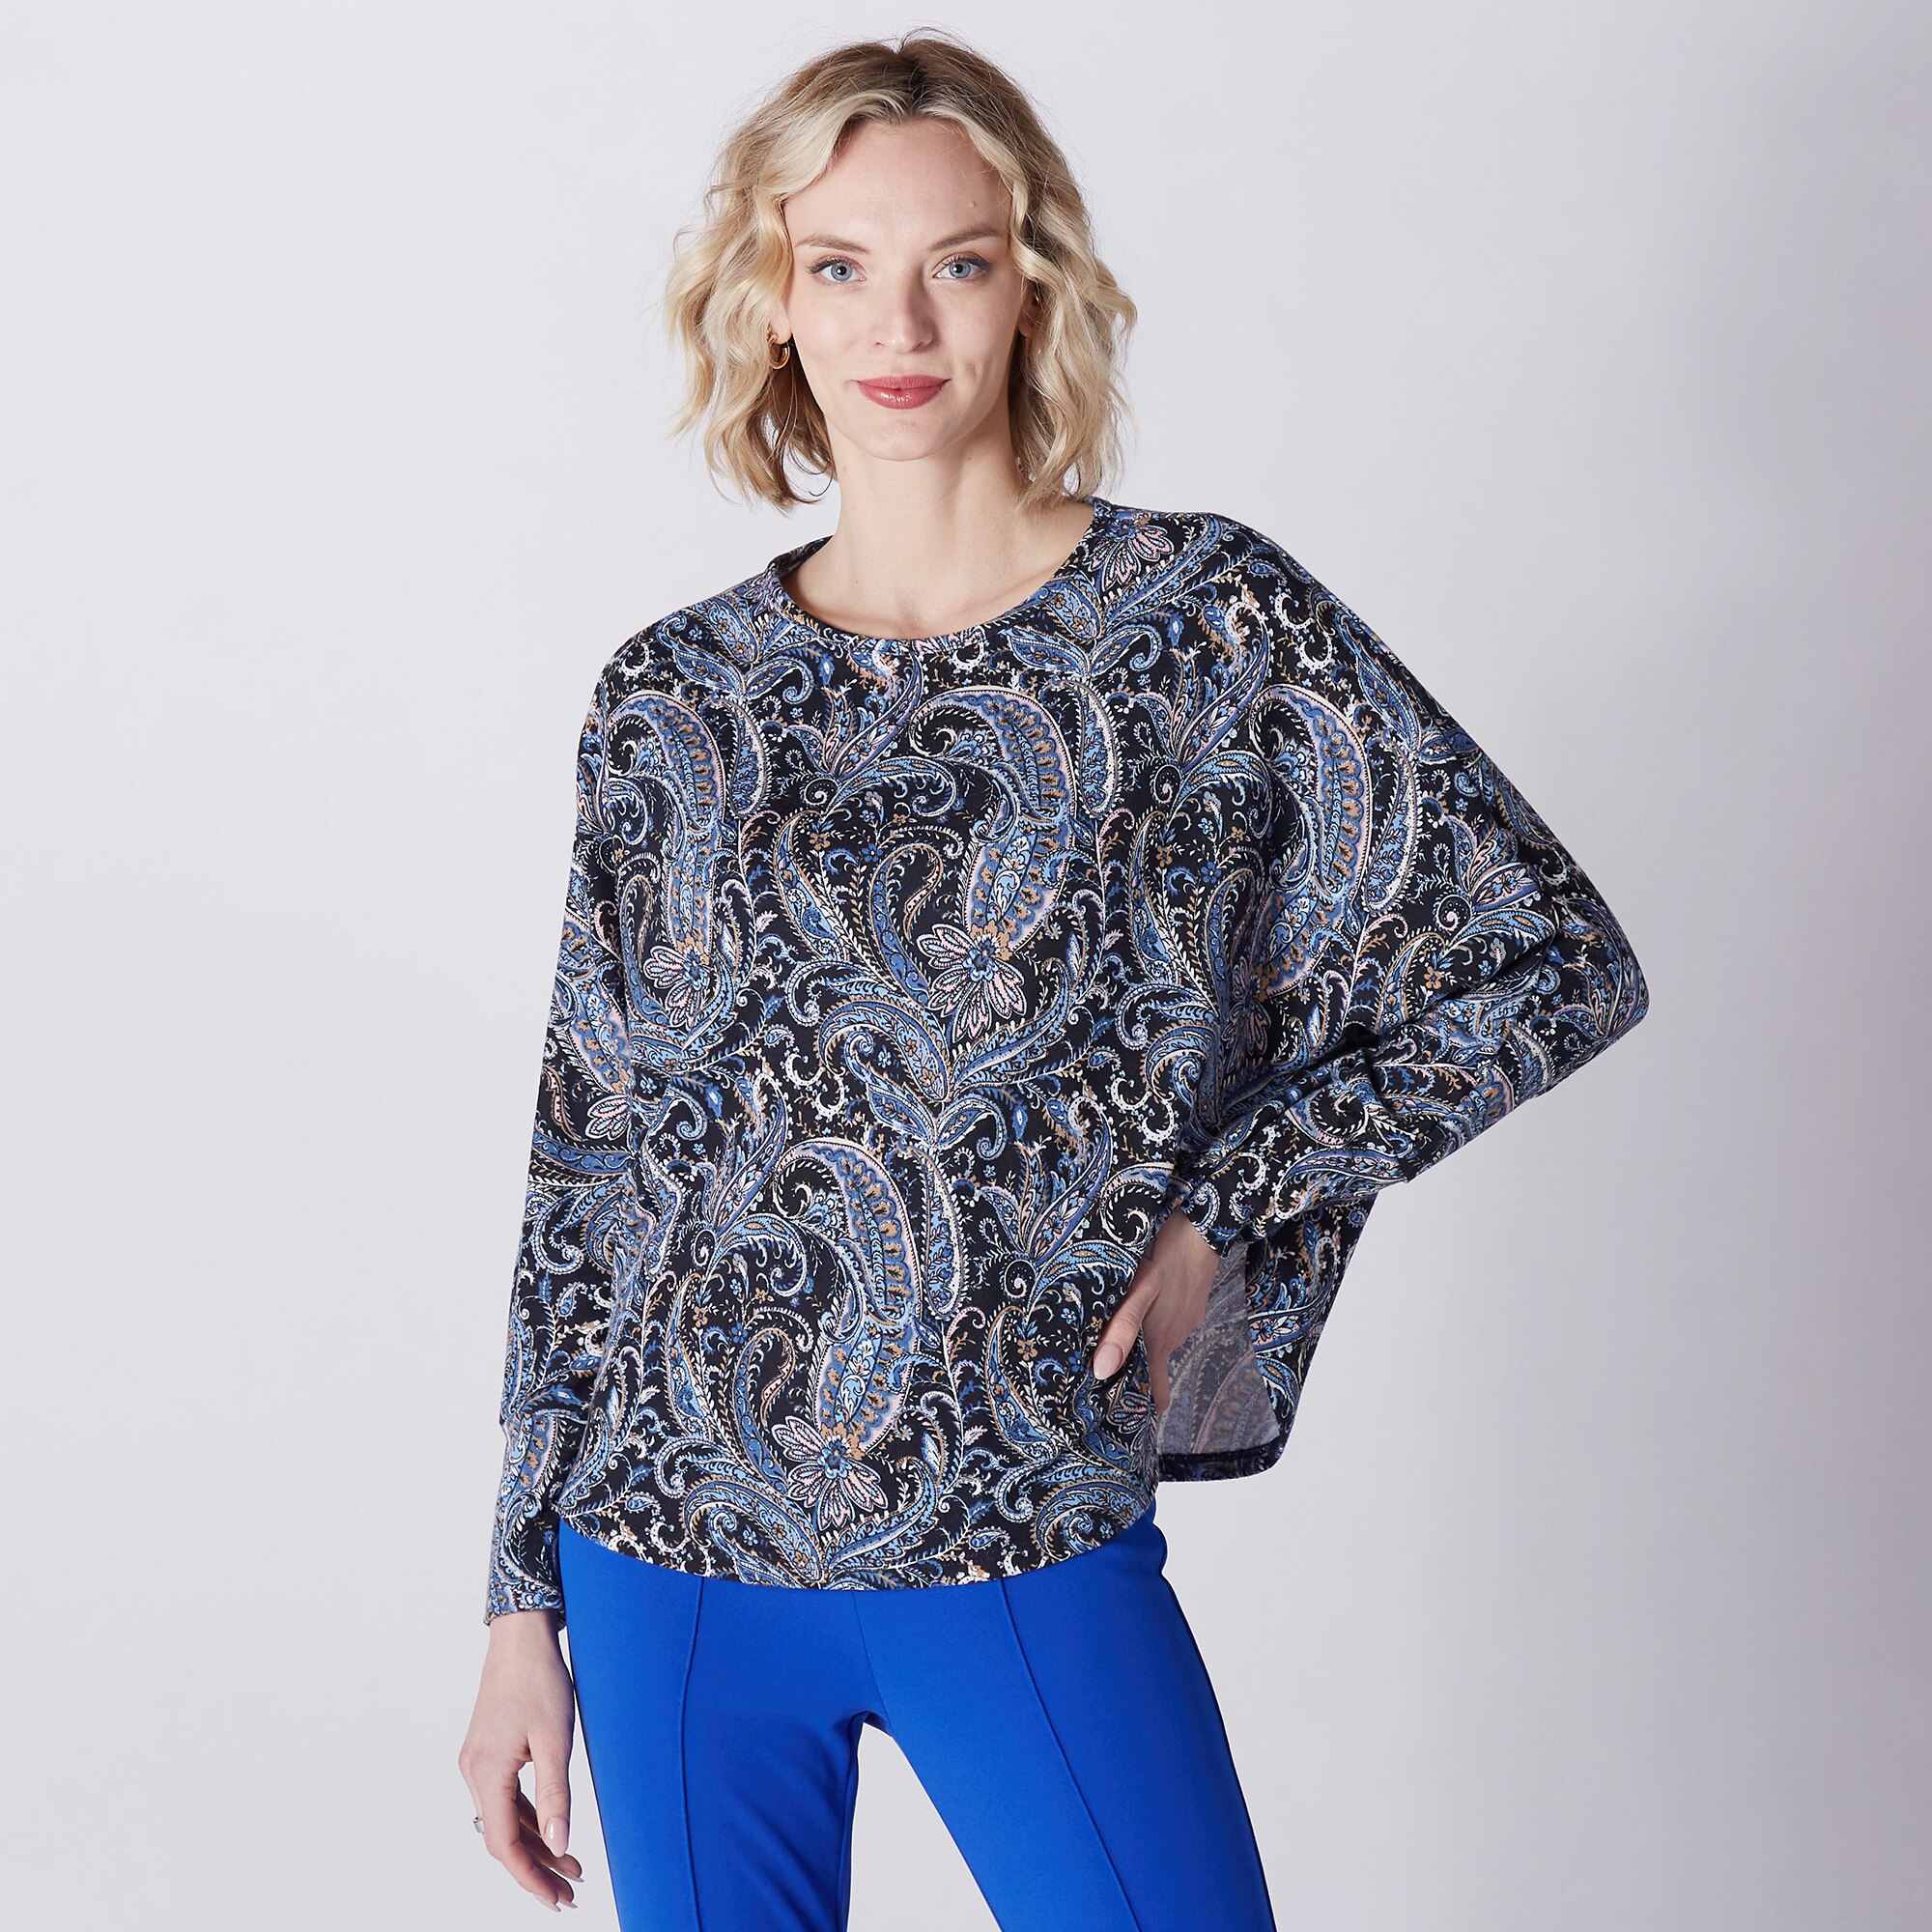 Kim & Co. Soft Touch Poncho Top